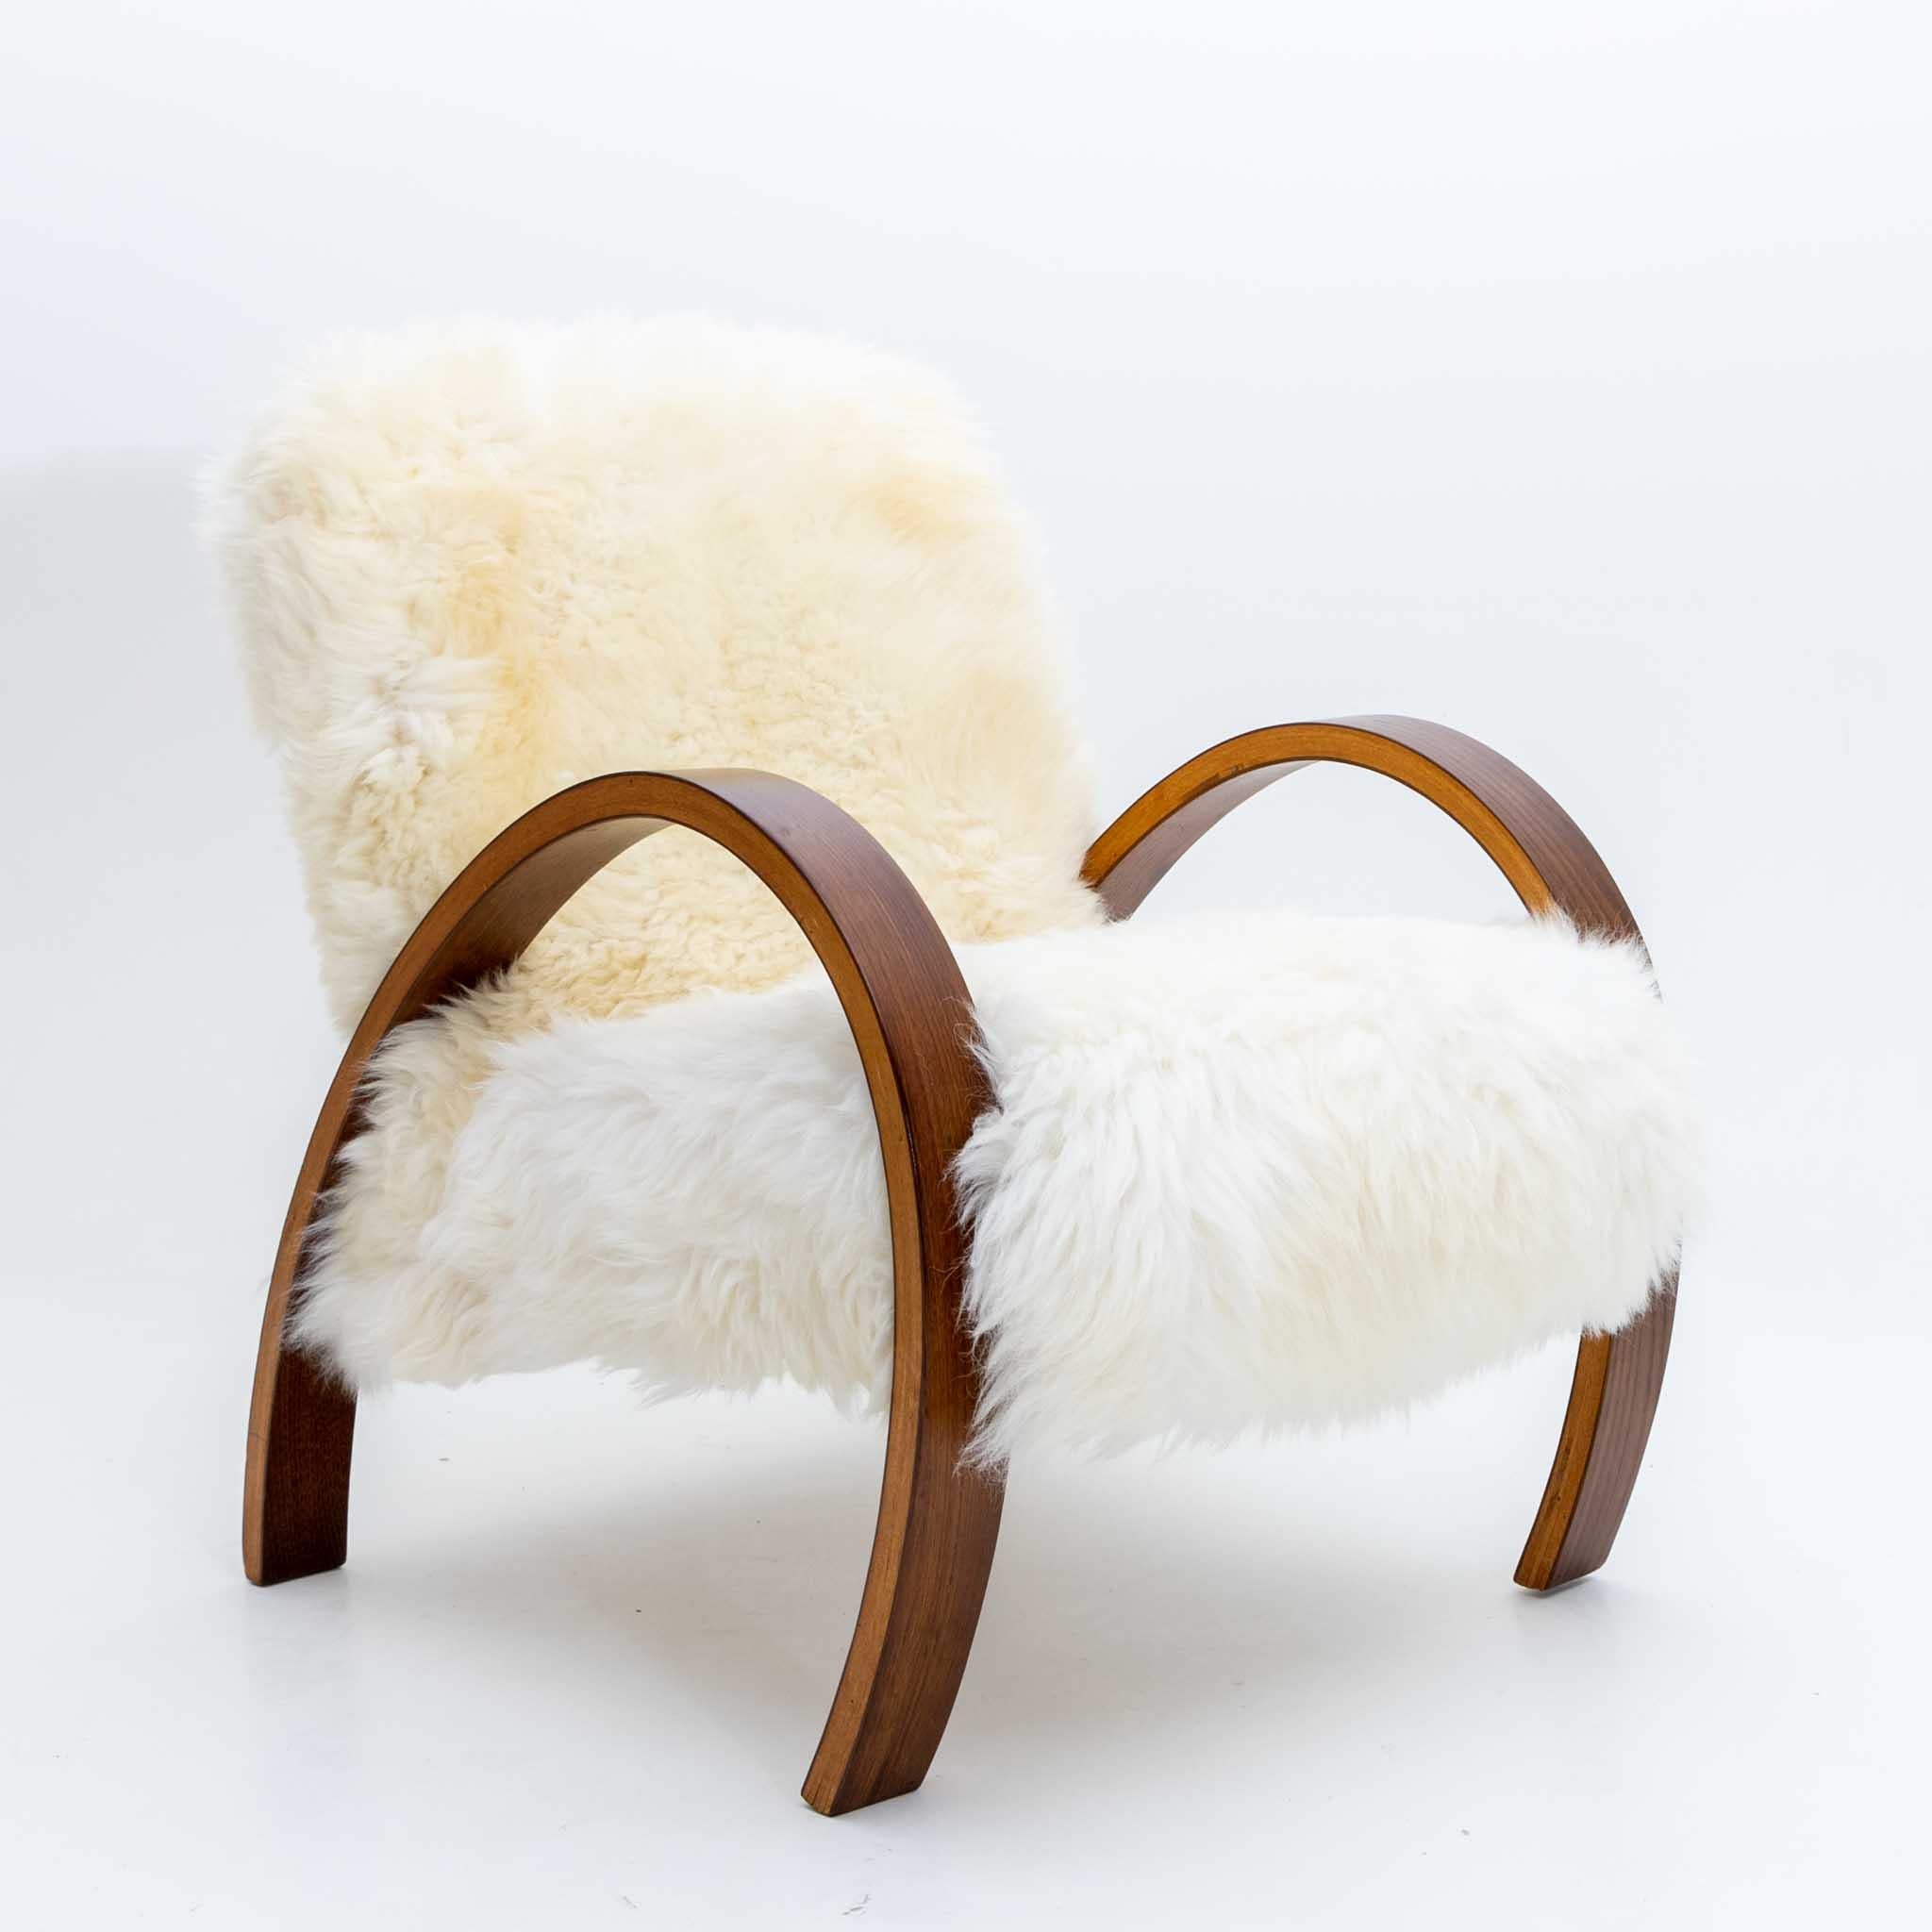 Armchair with elegantly curved armrests made of plywood with dark stained tops. The armchair has been newly upholstered with a genuine sheepskin.